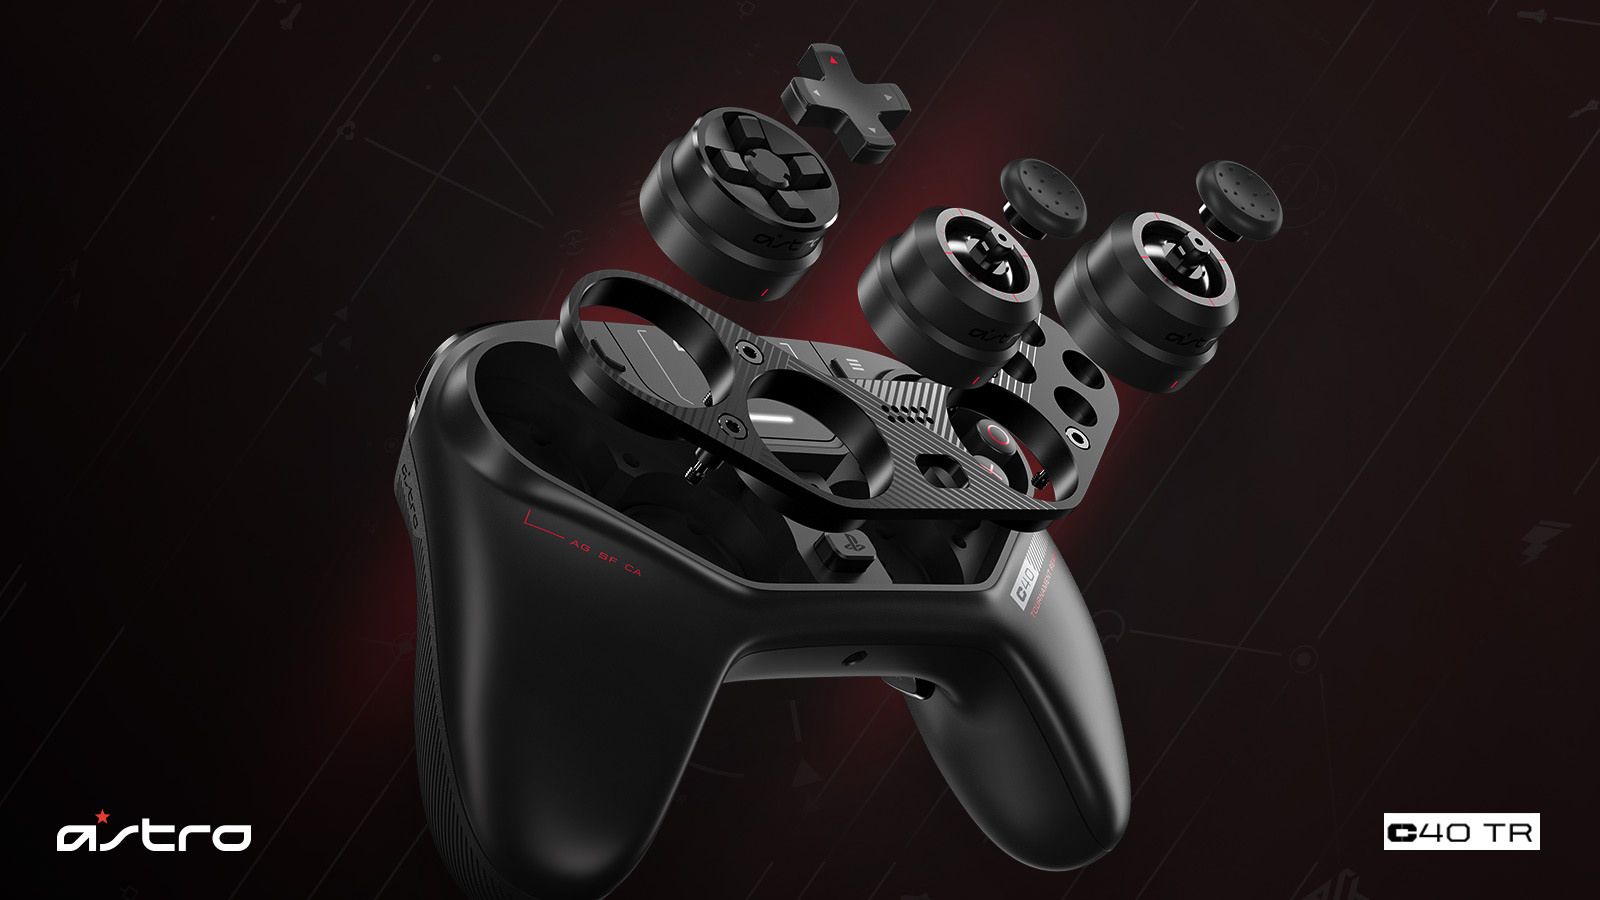 Astro C40 TR Is A New Modular Pro Controller For the PlayStation 4 | IBTimes